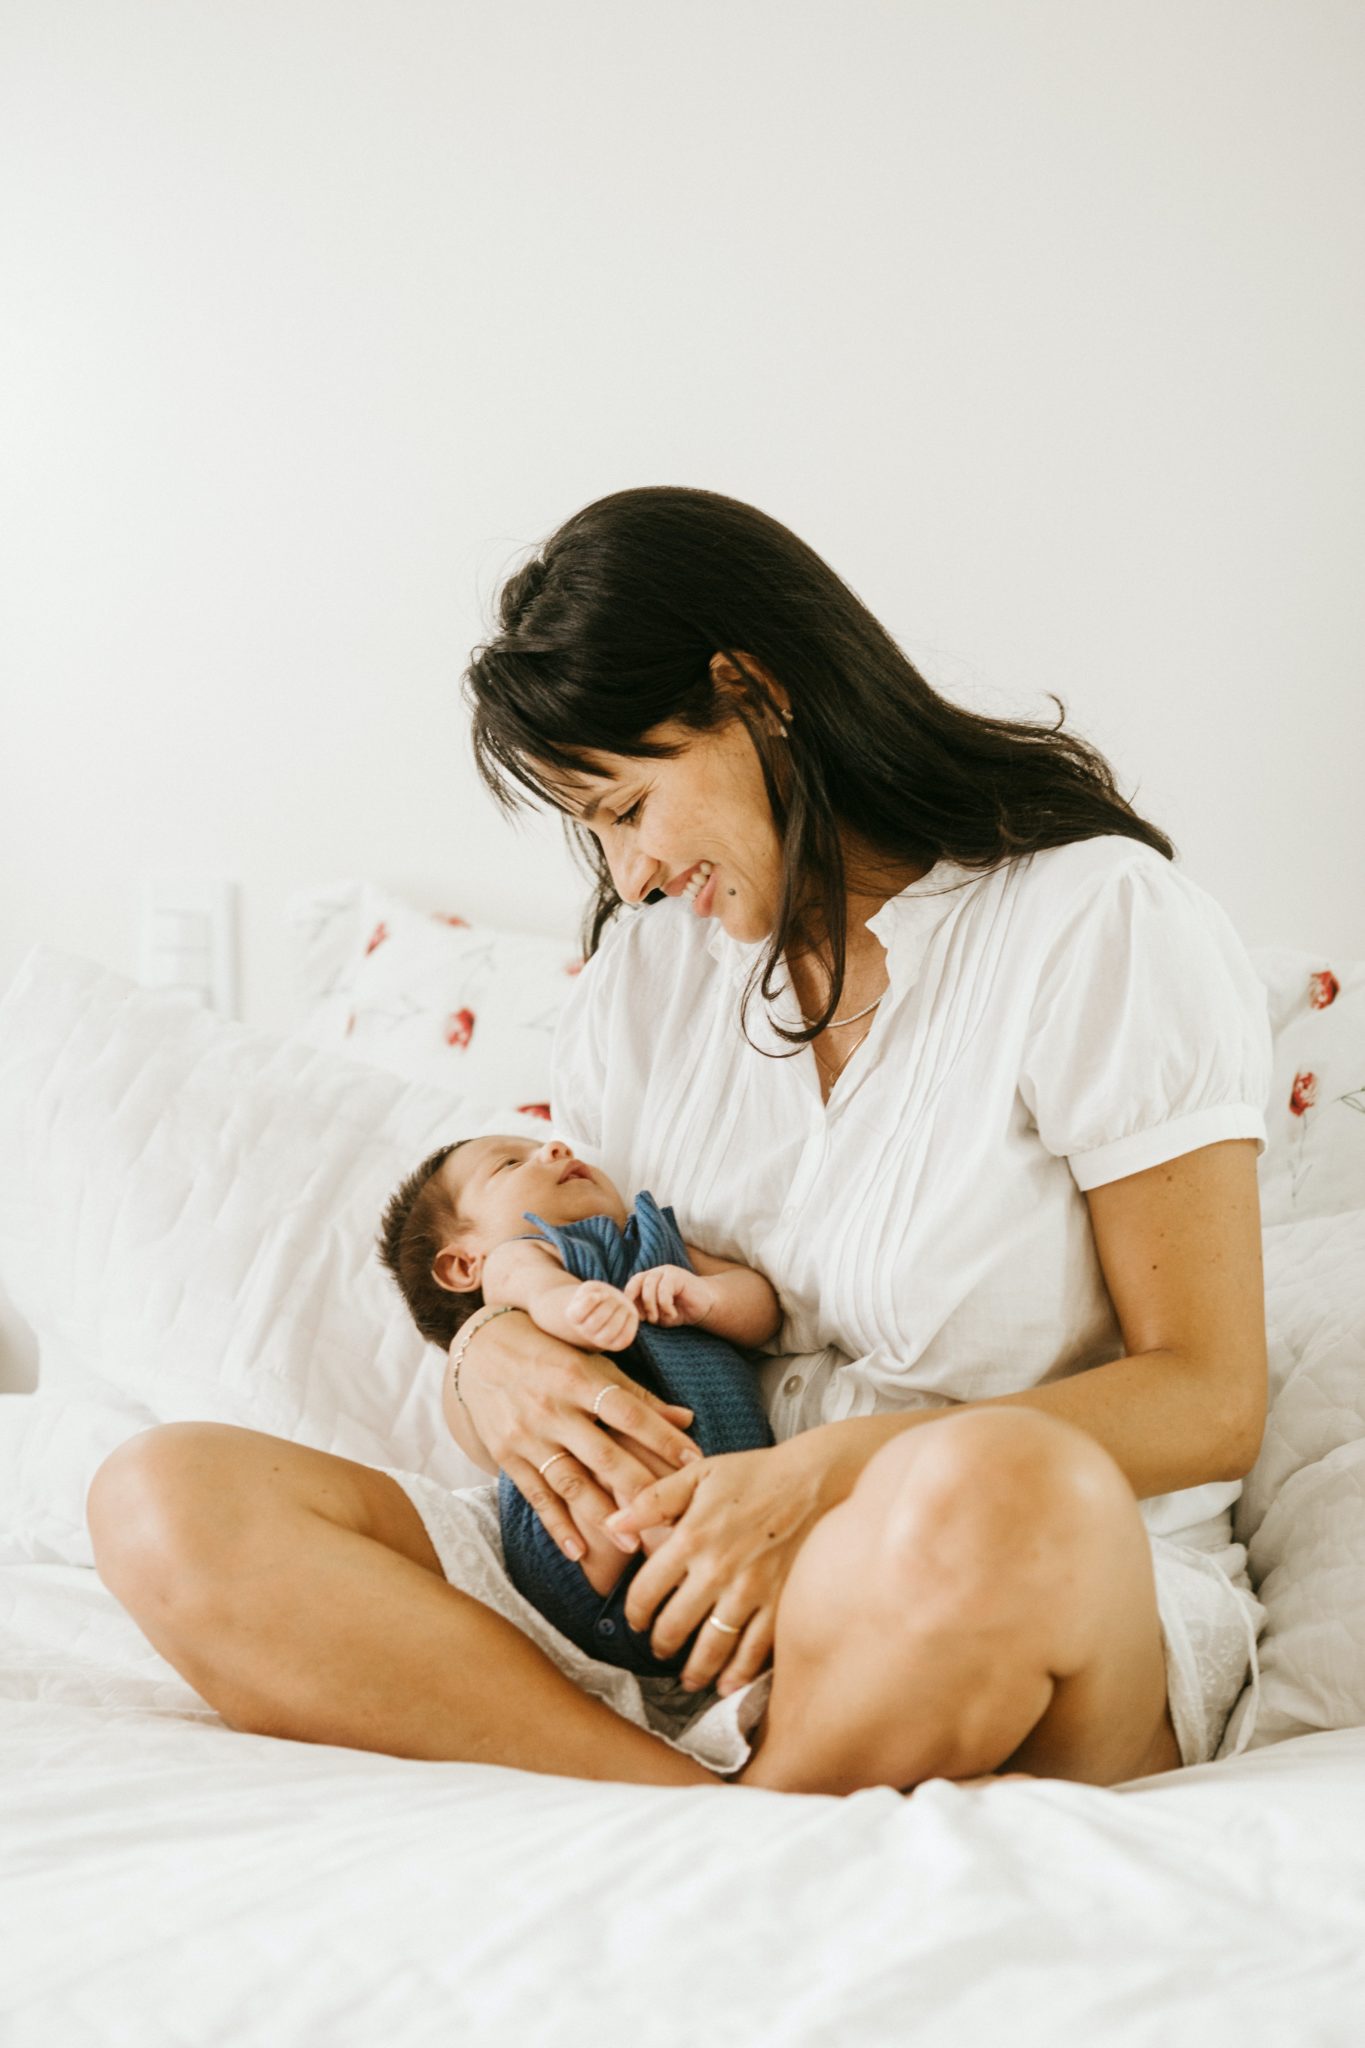 8 Ways You Can Make Life Easier for New Parents | Wit & Delight